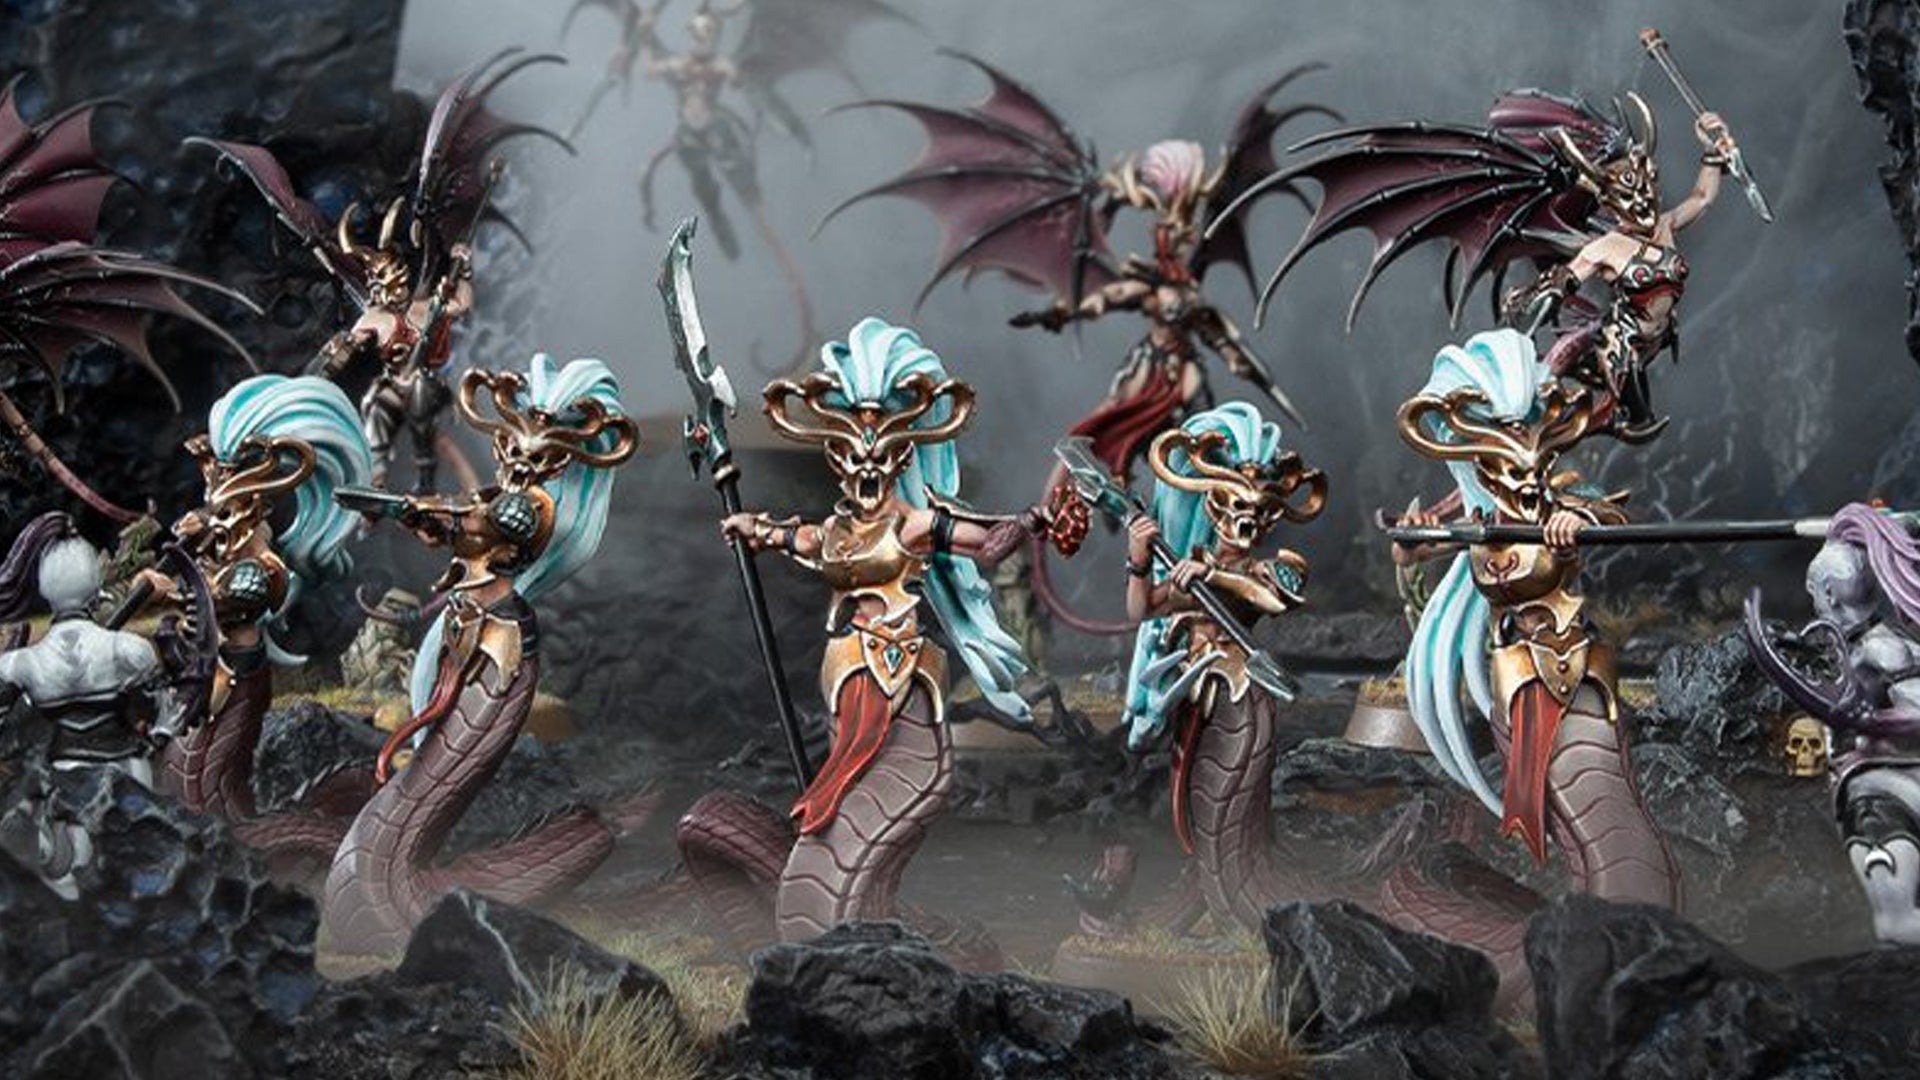 Image for Warhammer: Age of Sigmar’s next big story expansion, Broken Realms, introduces new lore, rules and miniatures